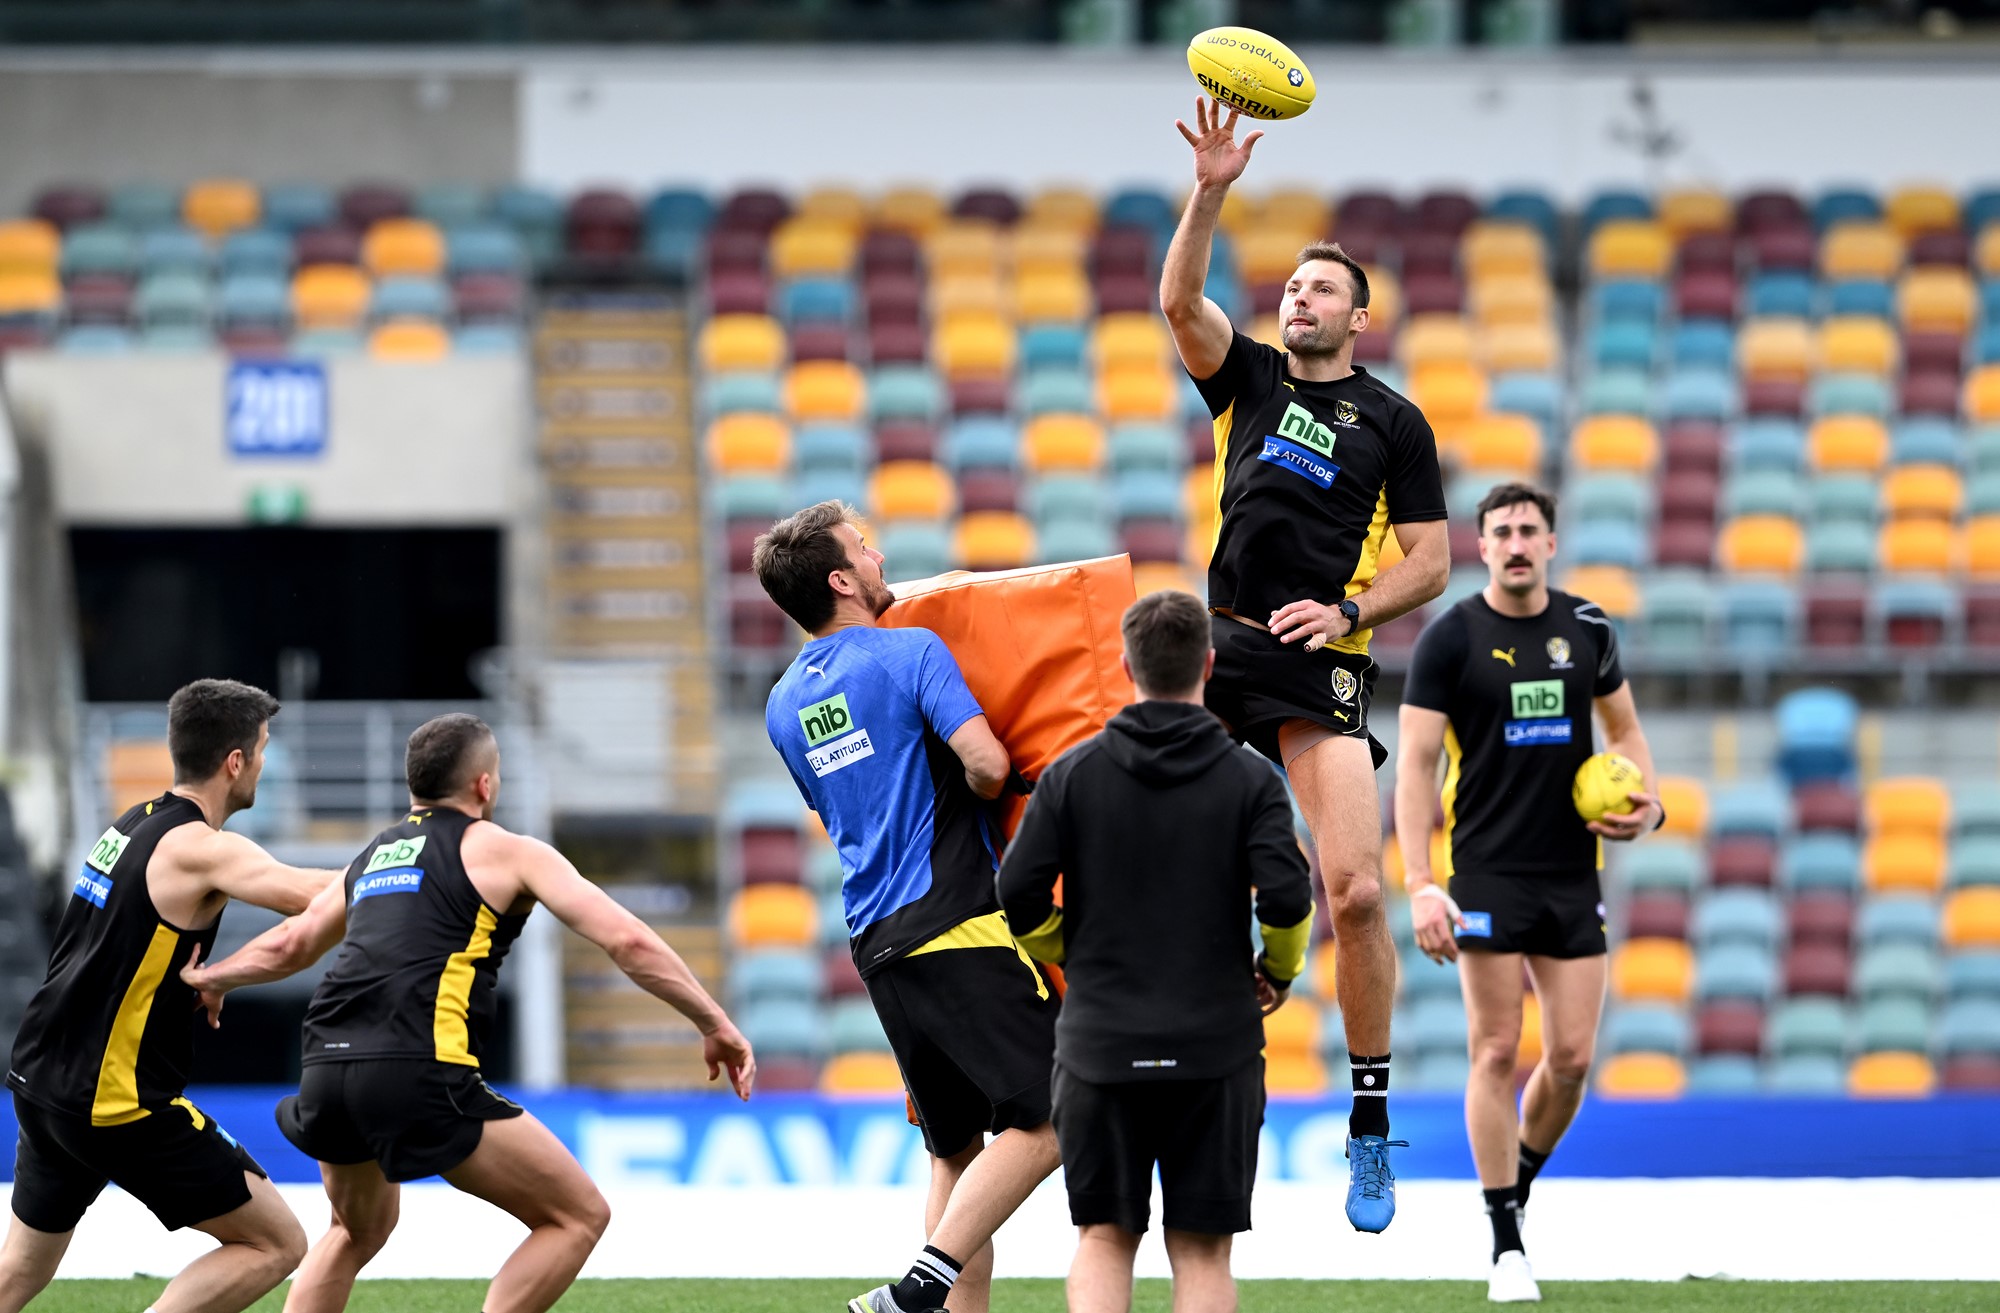 Toby Nankervis taps the ball during a ruck drill on the Gabba